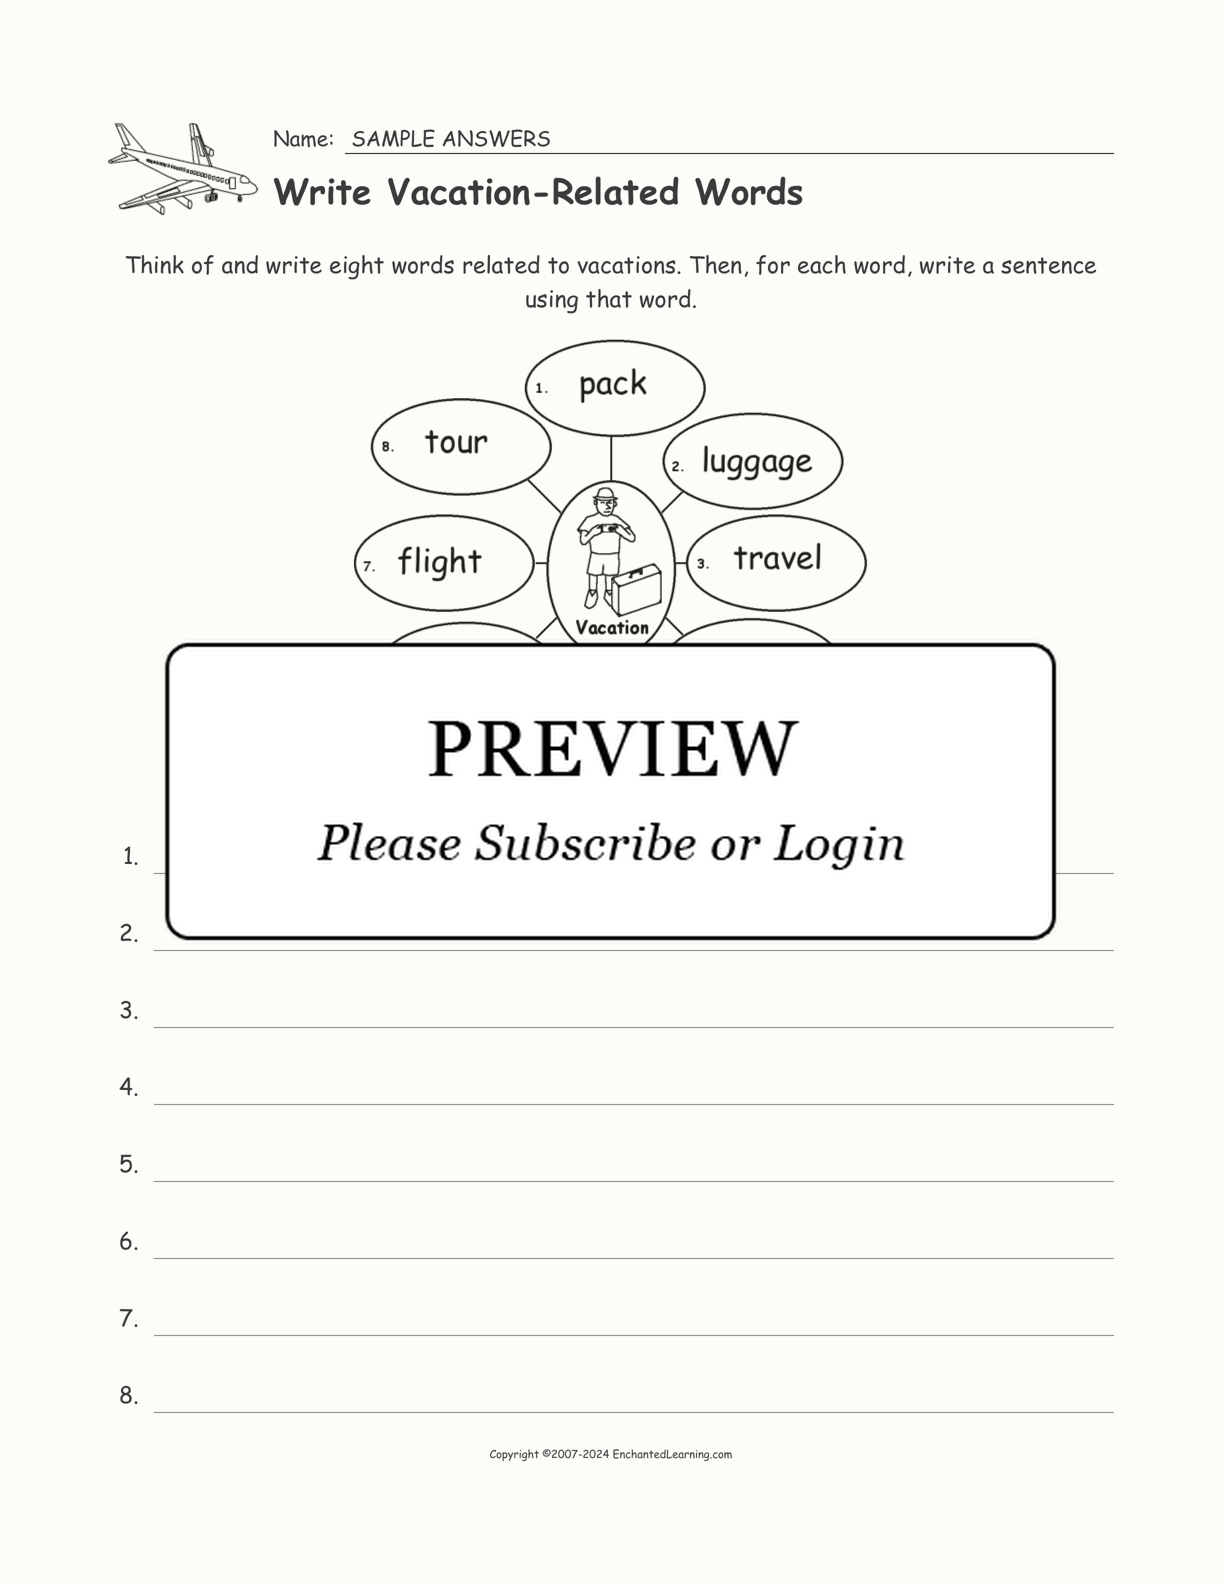 Write Vacation-Related Words interactive worksheet page 2